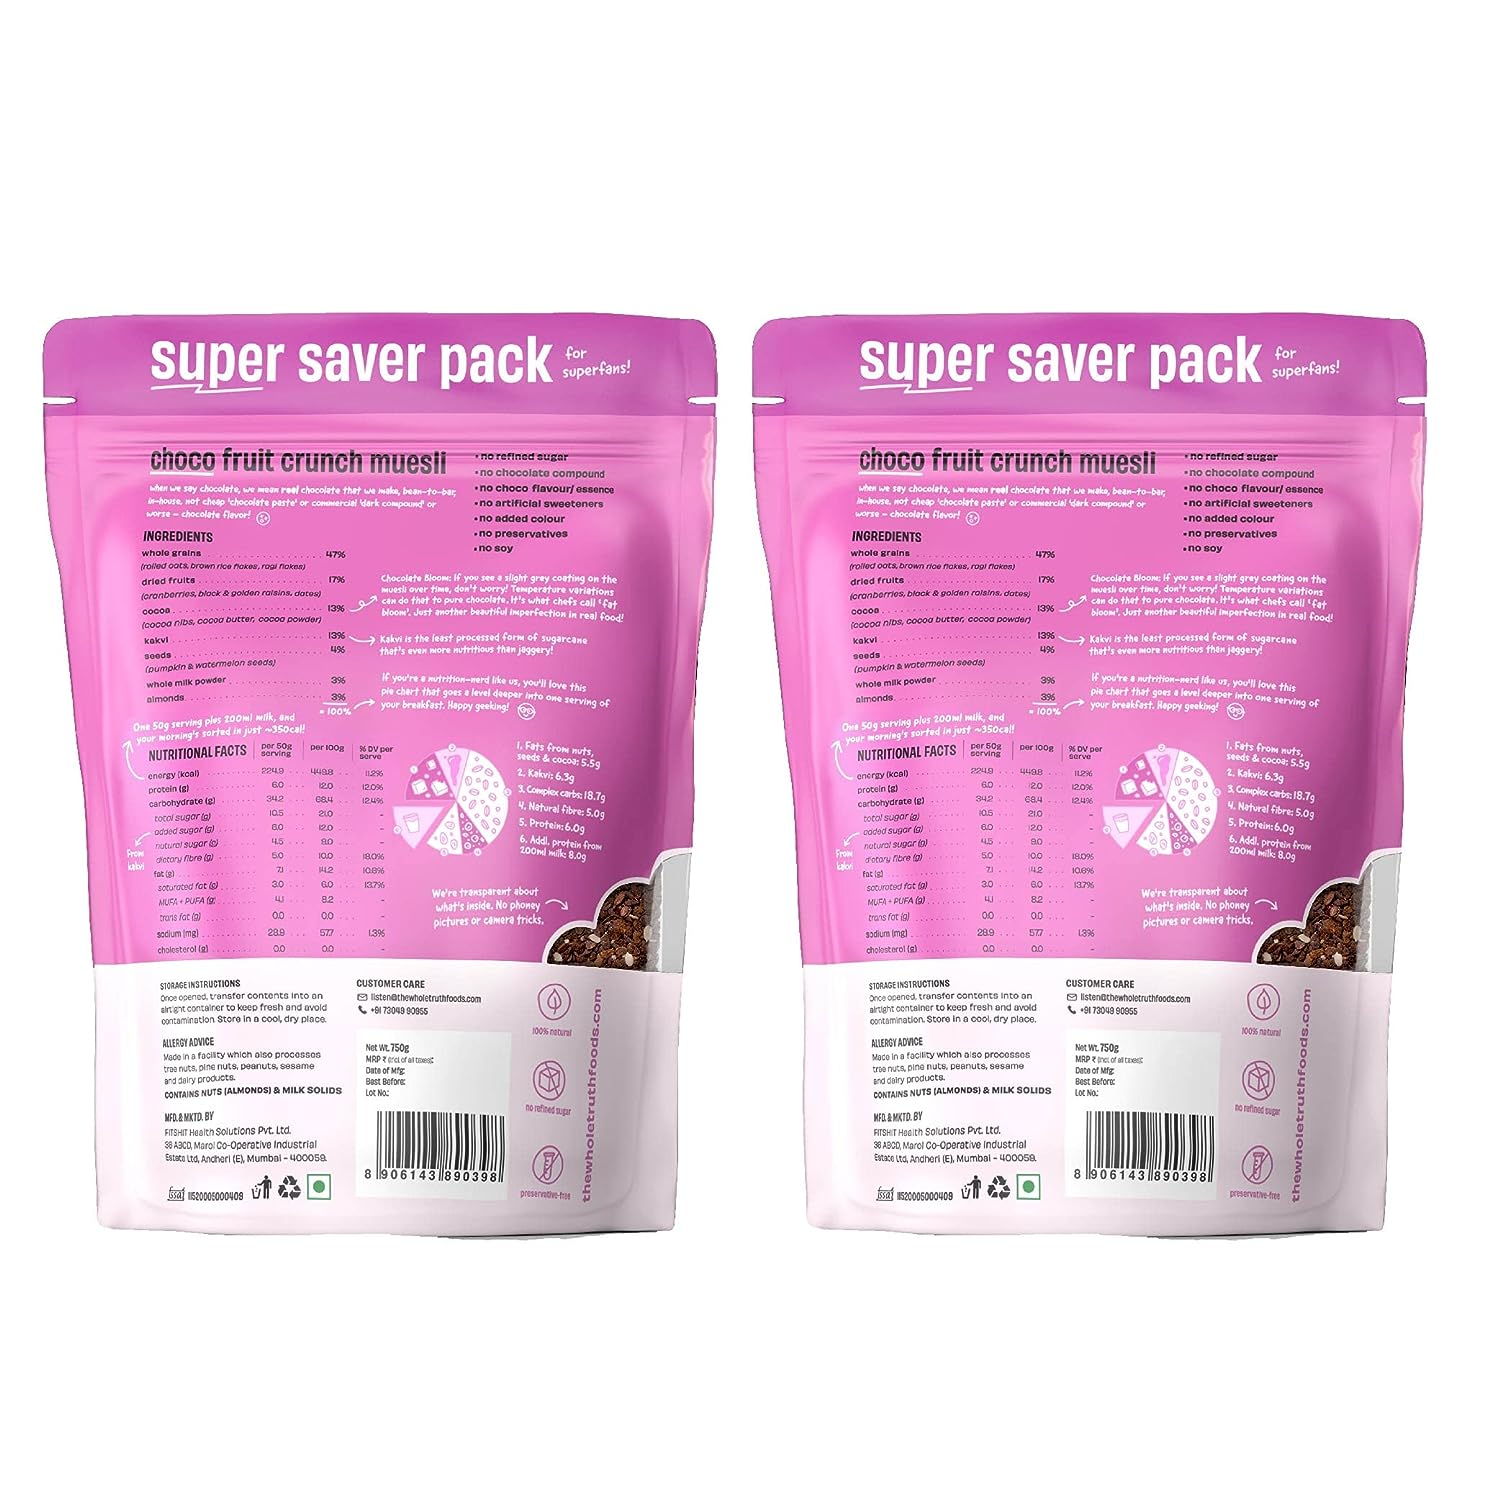 The Whole Truth - SUPERSAVER Breakfast Muesli Combo - Choco Fruit Crunch - 750g - Pack of 2 - Made with Real Chocolate - No artificial flavours - No preservatives